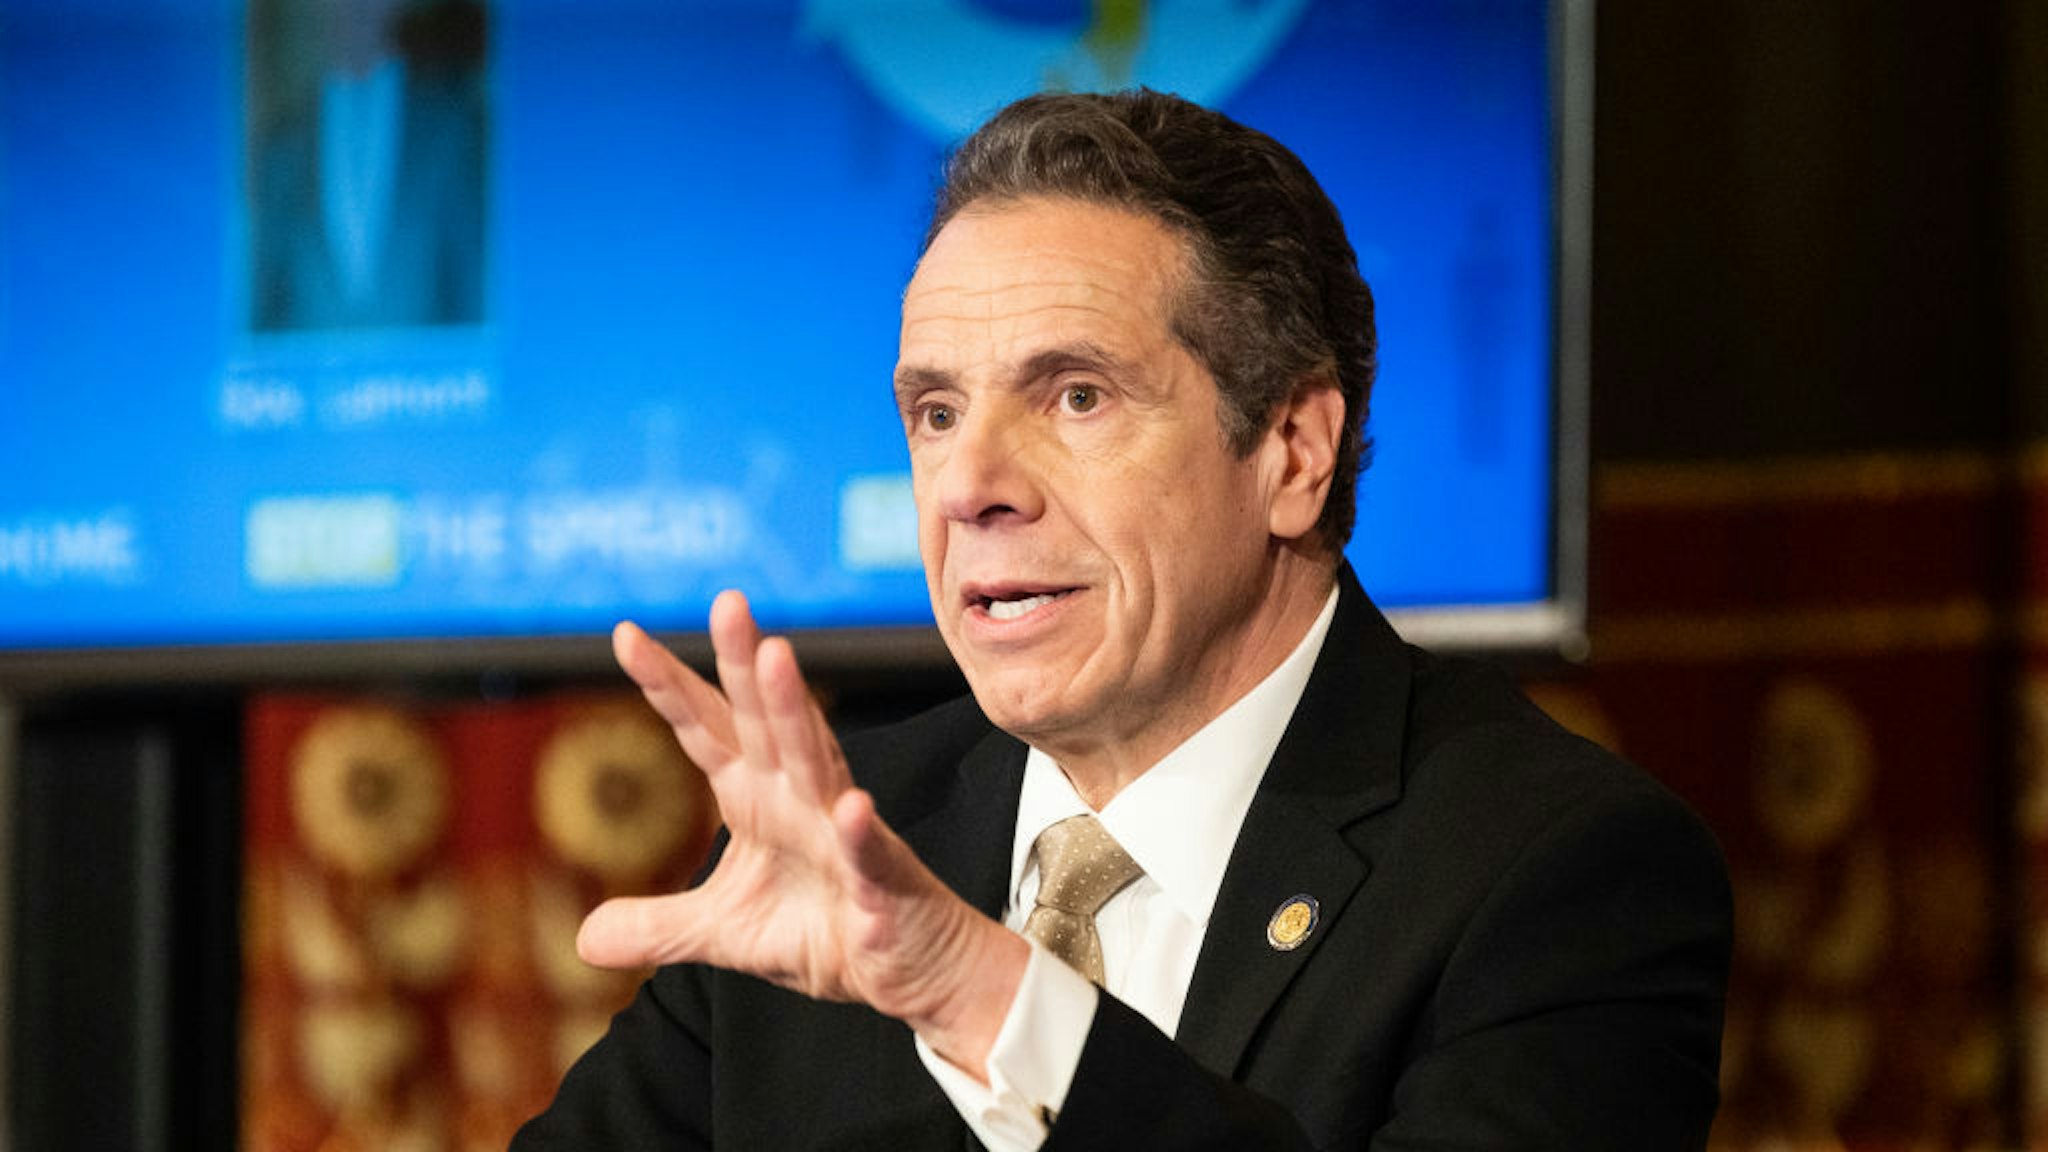 New York Governor Andrew Cuomo (D) speaking at a press Conference at the State Capitol reporting on the latest development of the Covid-19 Coronavirus situation.